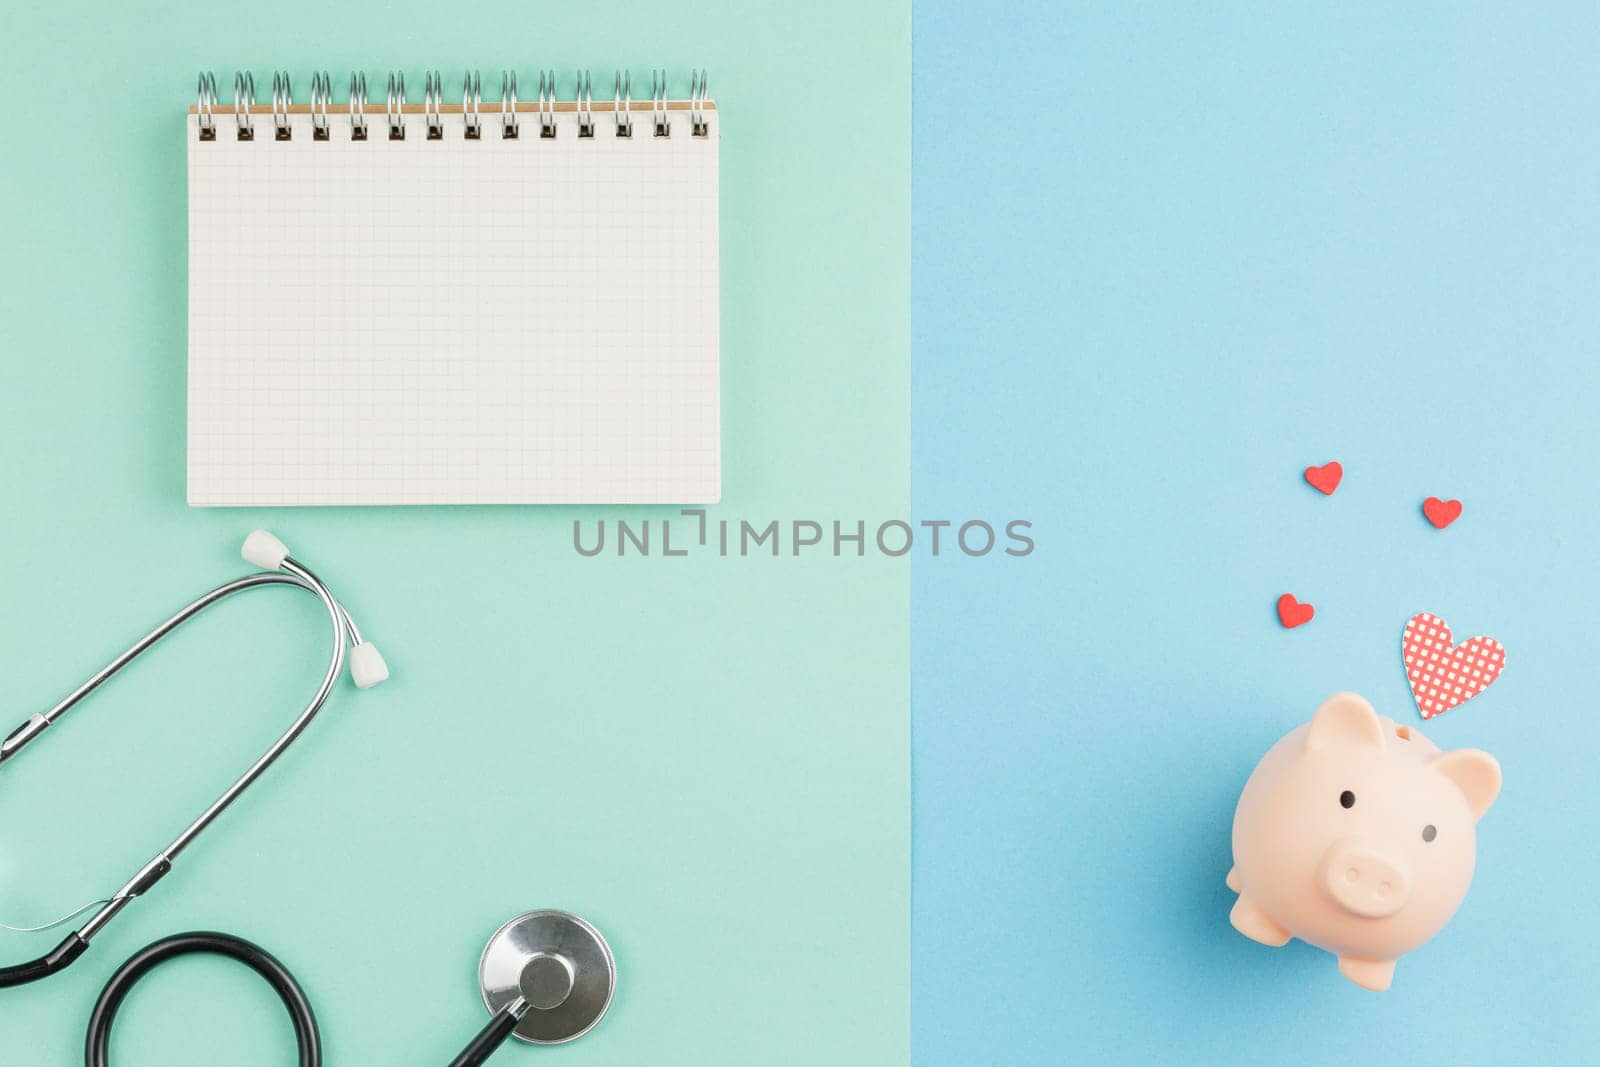 Open spiral notebook. Charity for medicine. Pig piggy bank with red hearts and a stethoscope on a two color background. Donations and volunteering concept. Top view, flat lay.